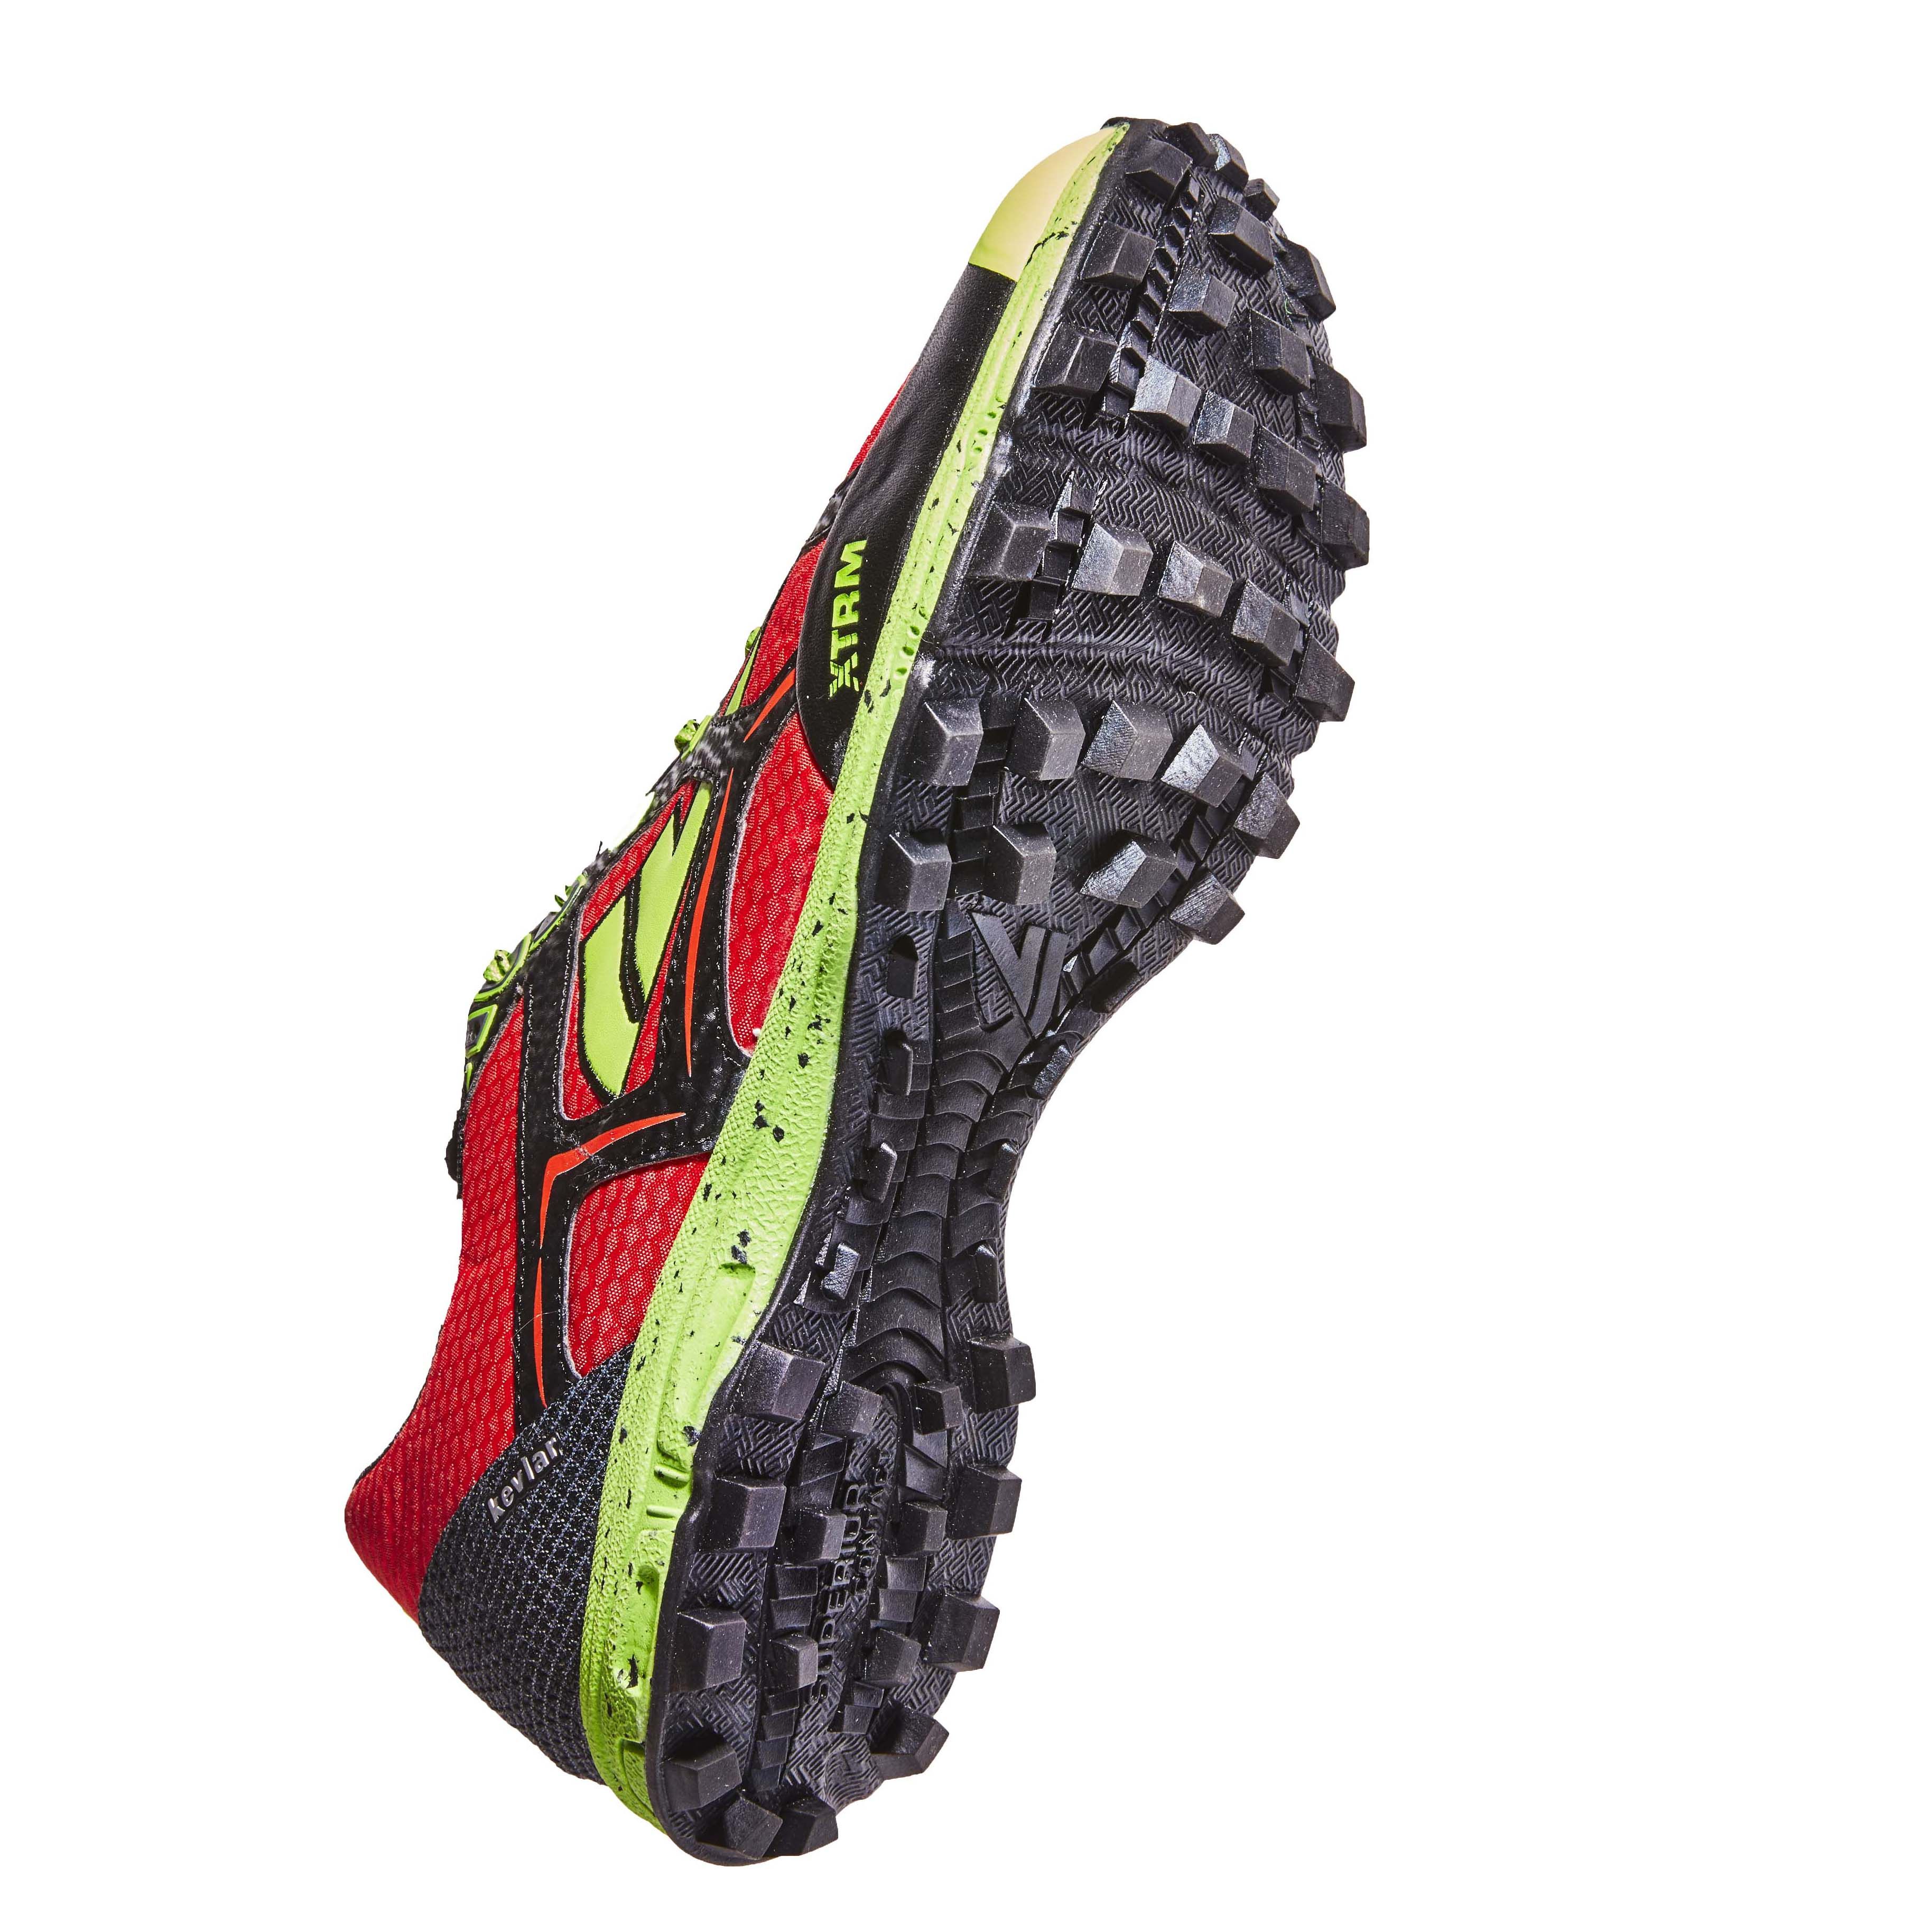 best stability trail running shoes